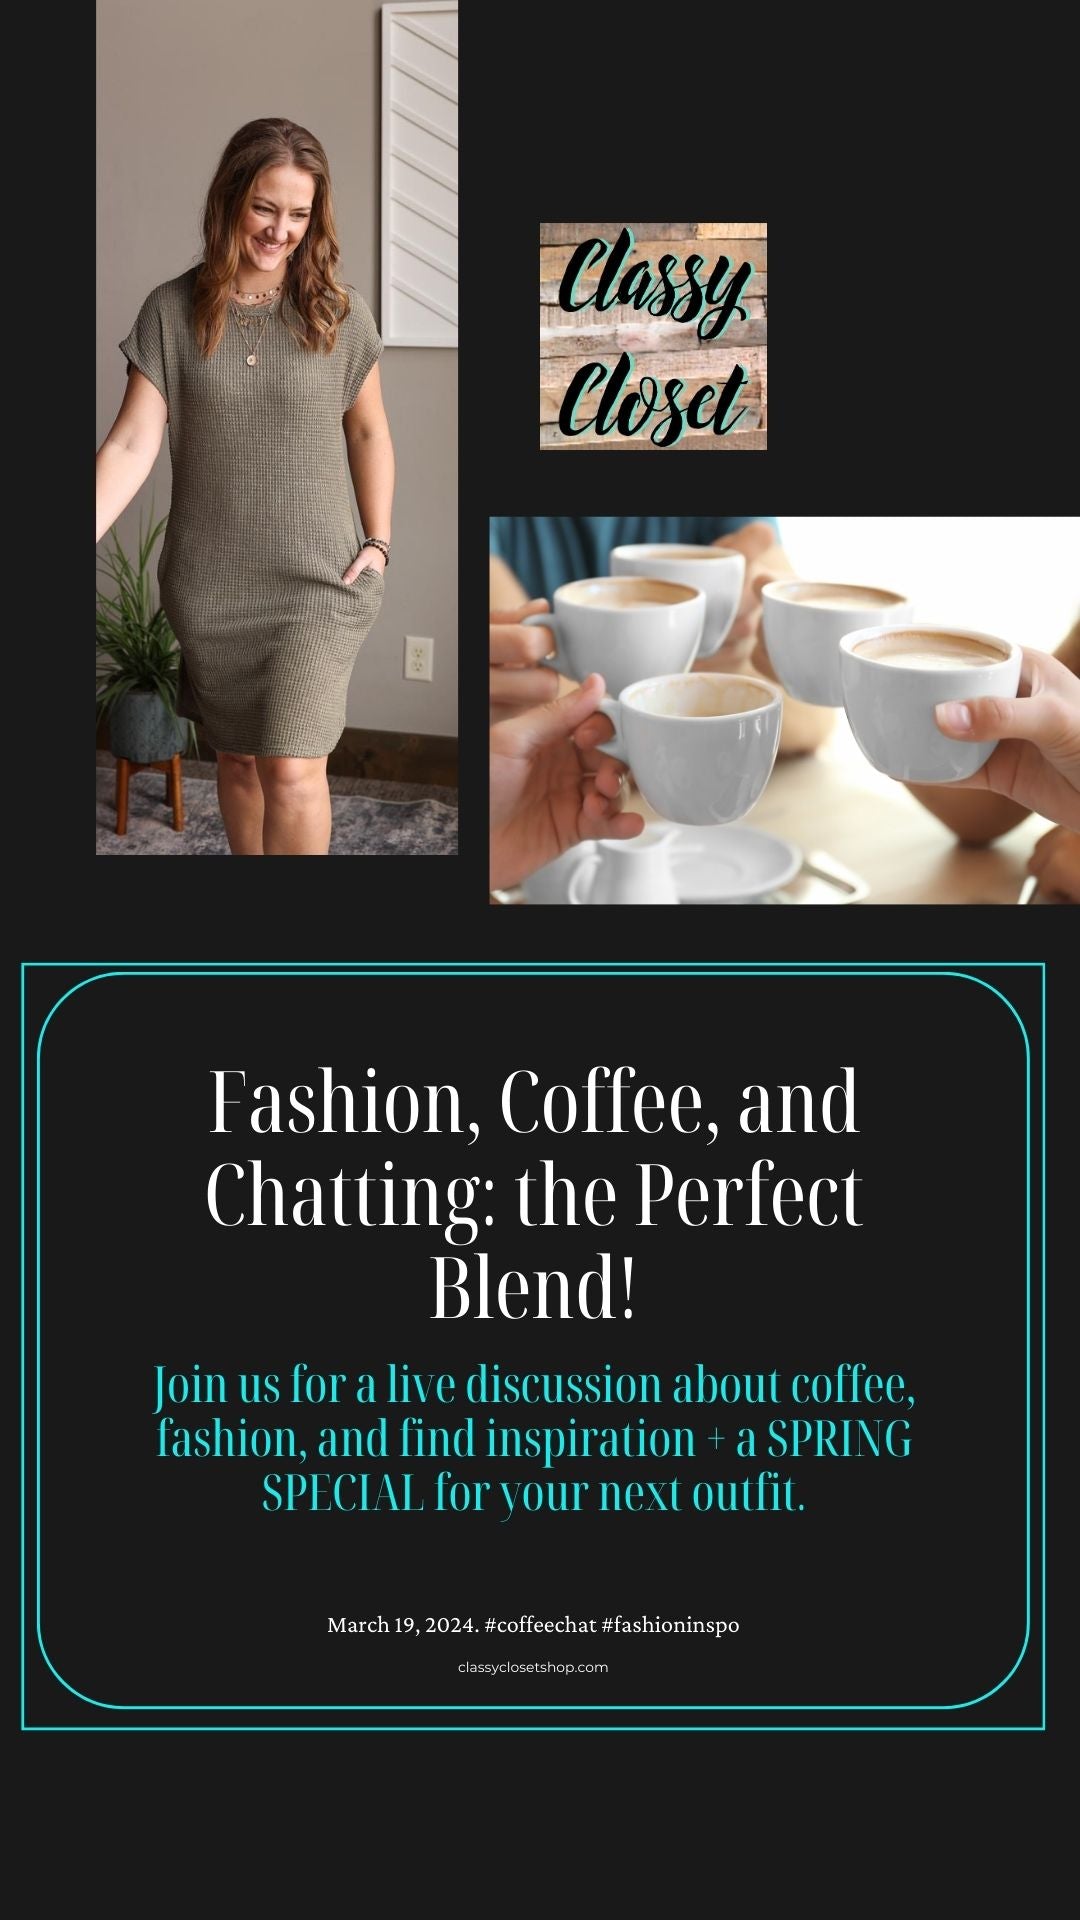 Fashion, Coffee, and Chatting: One Perfect Blend with Classy Closet 3/19/24